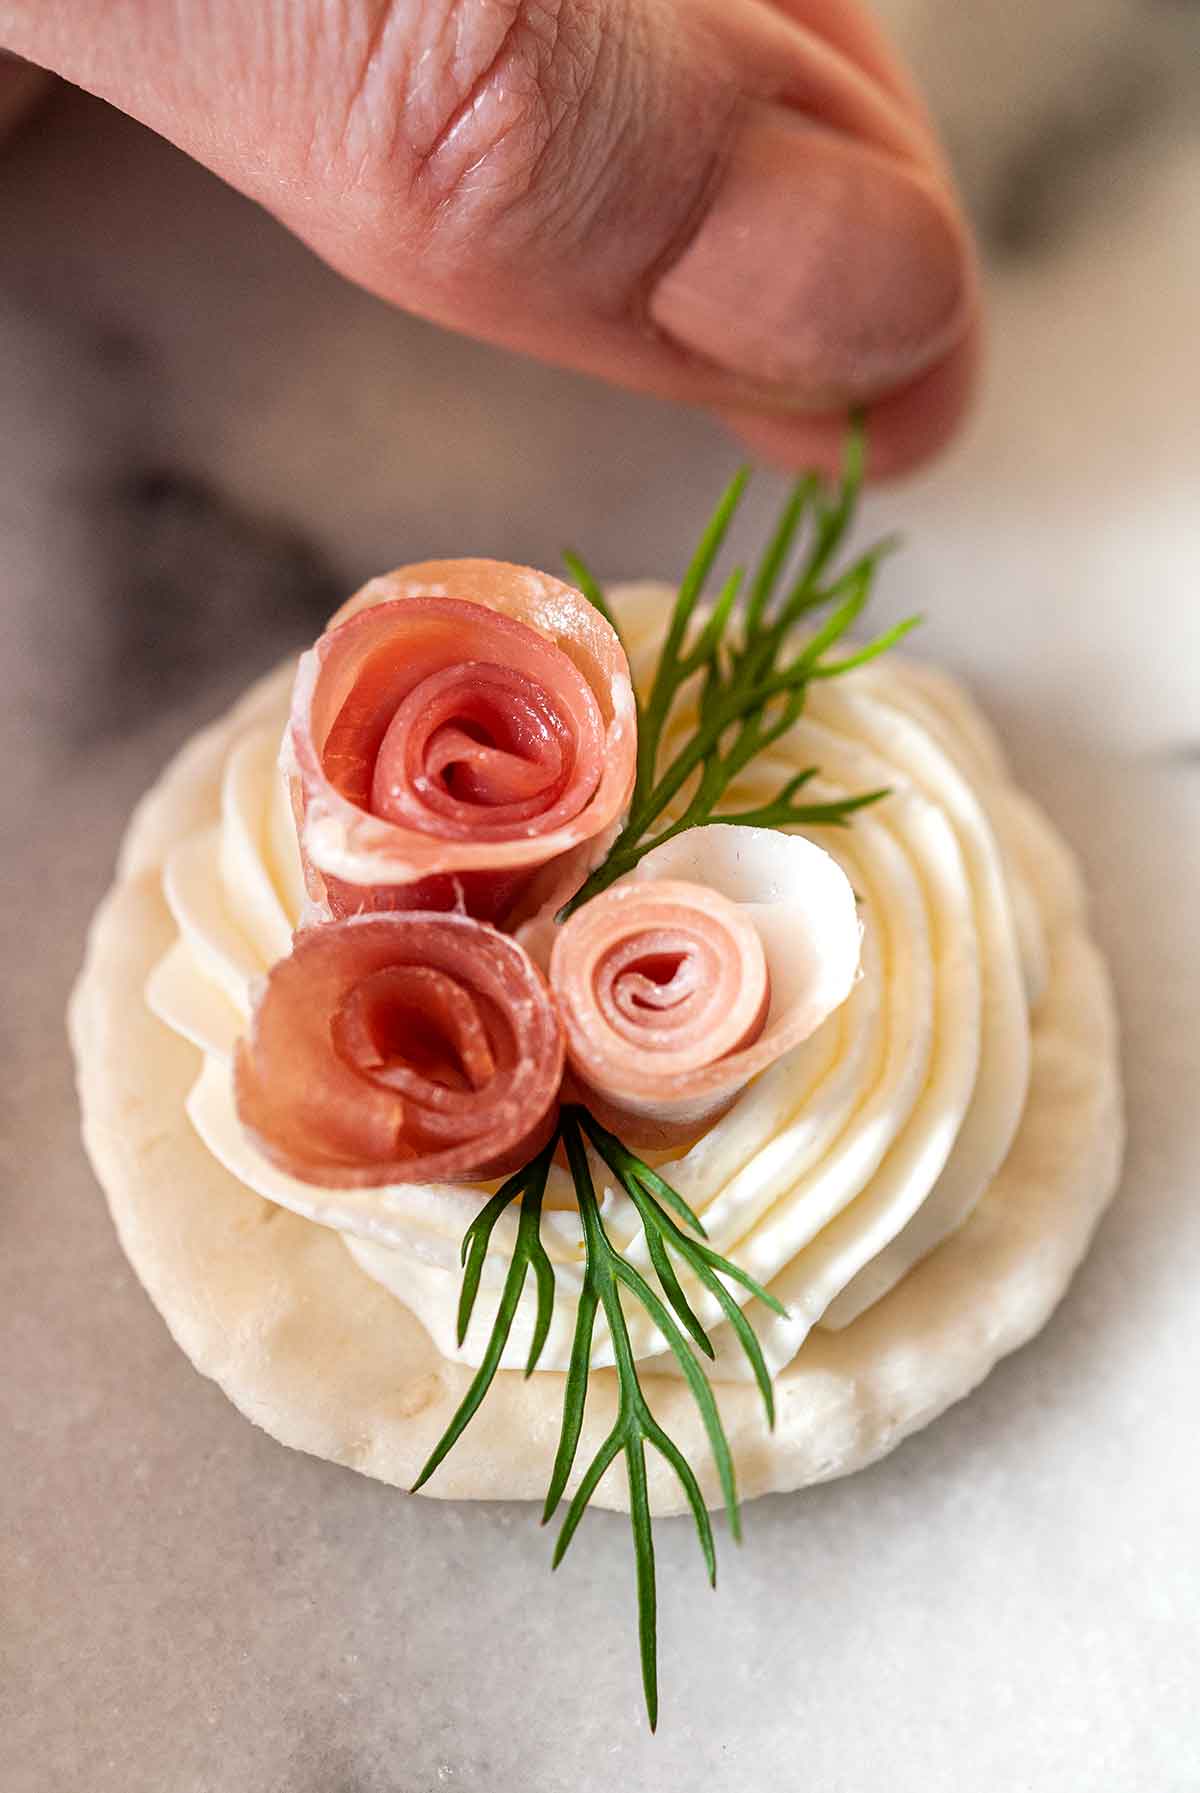 Fingers placing dill onto a prosciutto rose appetizer.